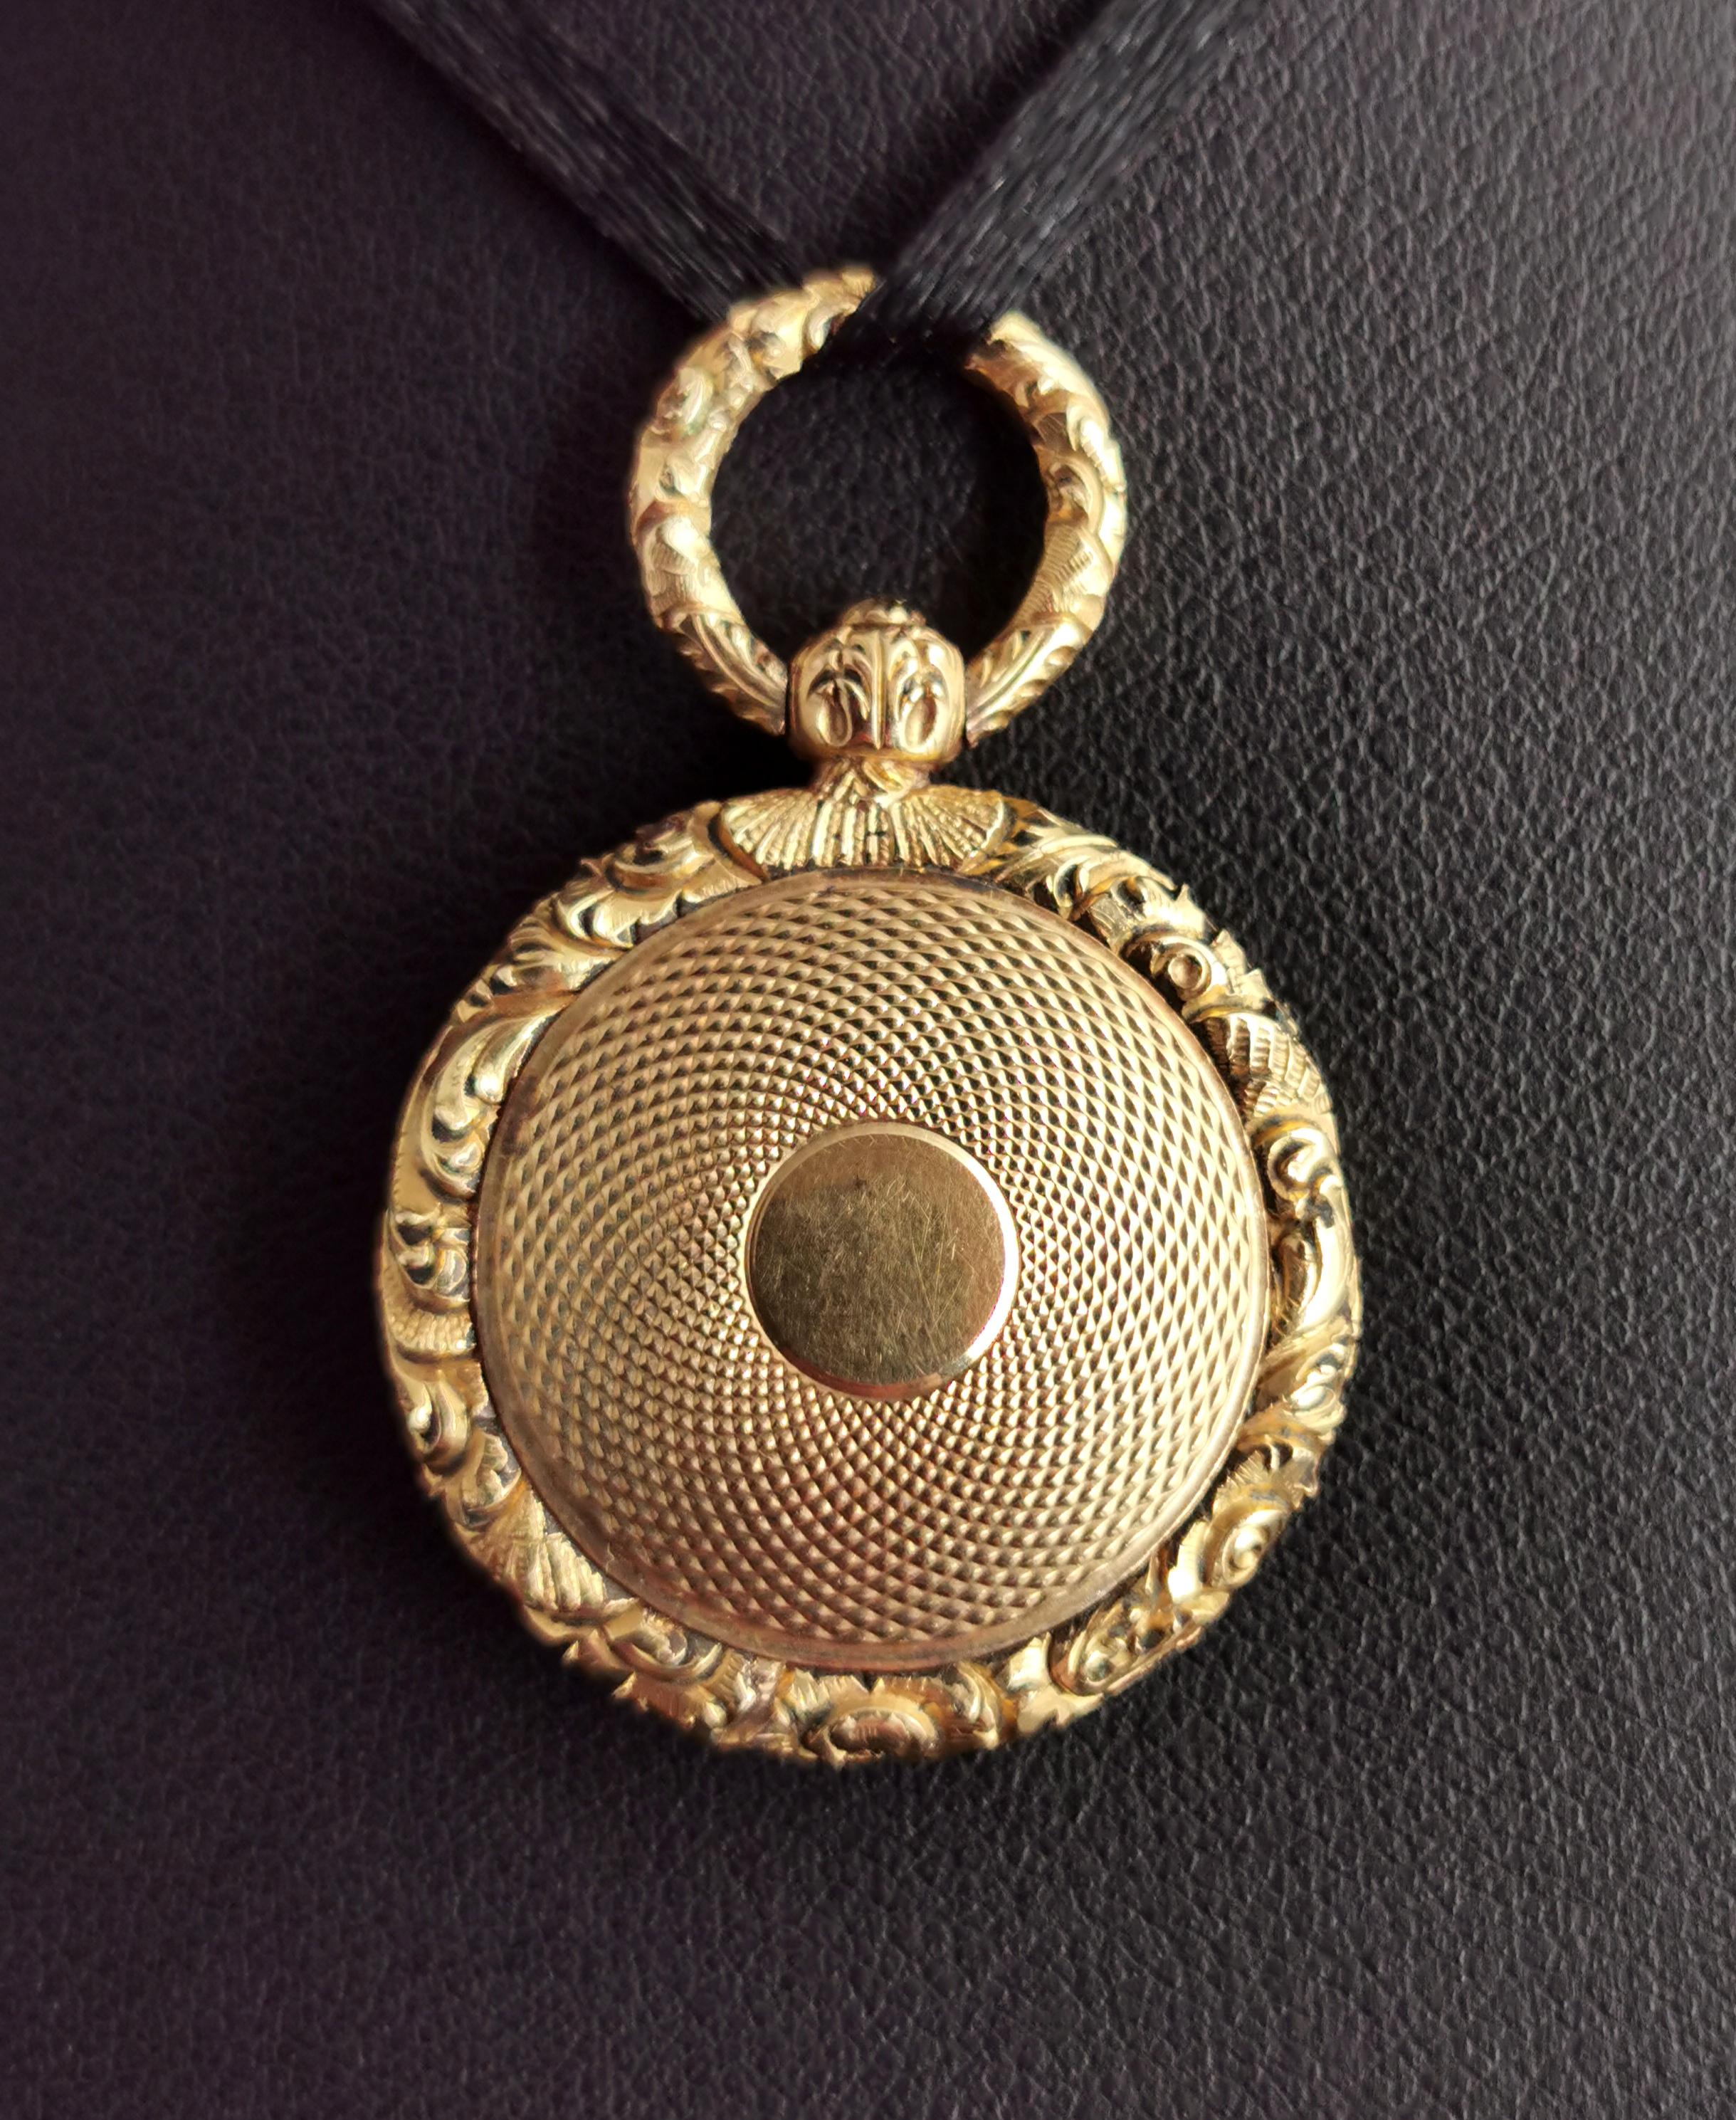 A gorgeous antique, late Georgian era mourning locket.

It is a circular shaped locket with a similar style to a pocket watch, heavily chased and engraved.

The locket has a decorative bow and a push clasp mechanism to open the locket door, within